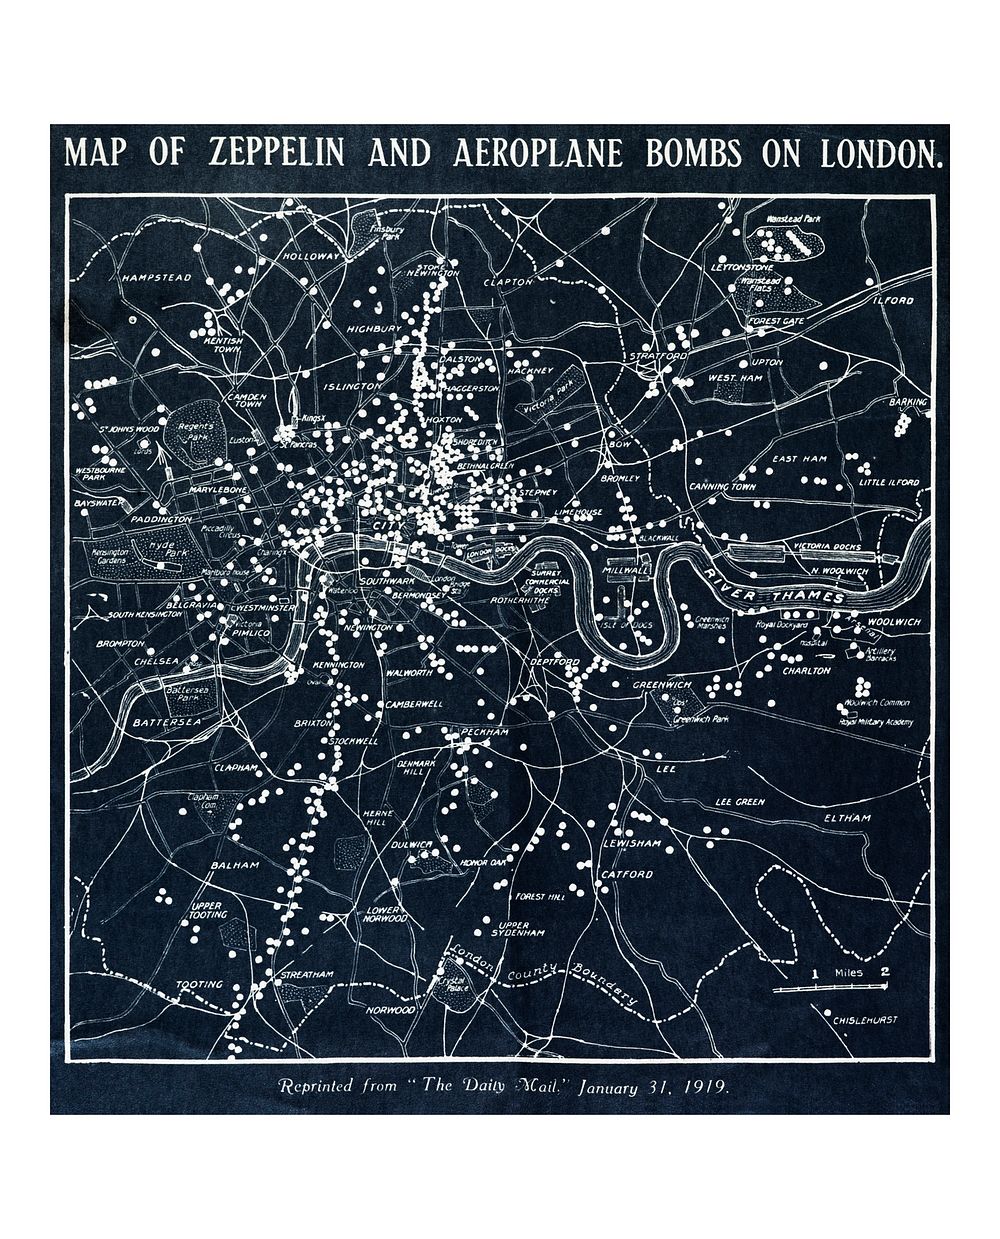 Vintage map of zeppelin and aeroplane bombs on London illustration wall art print and poster design remix from the original…